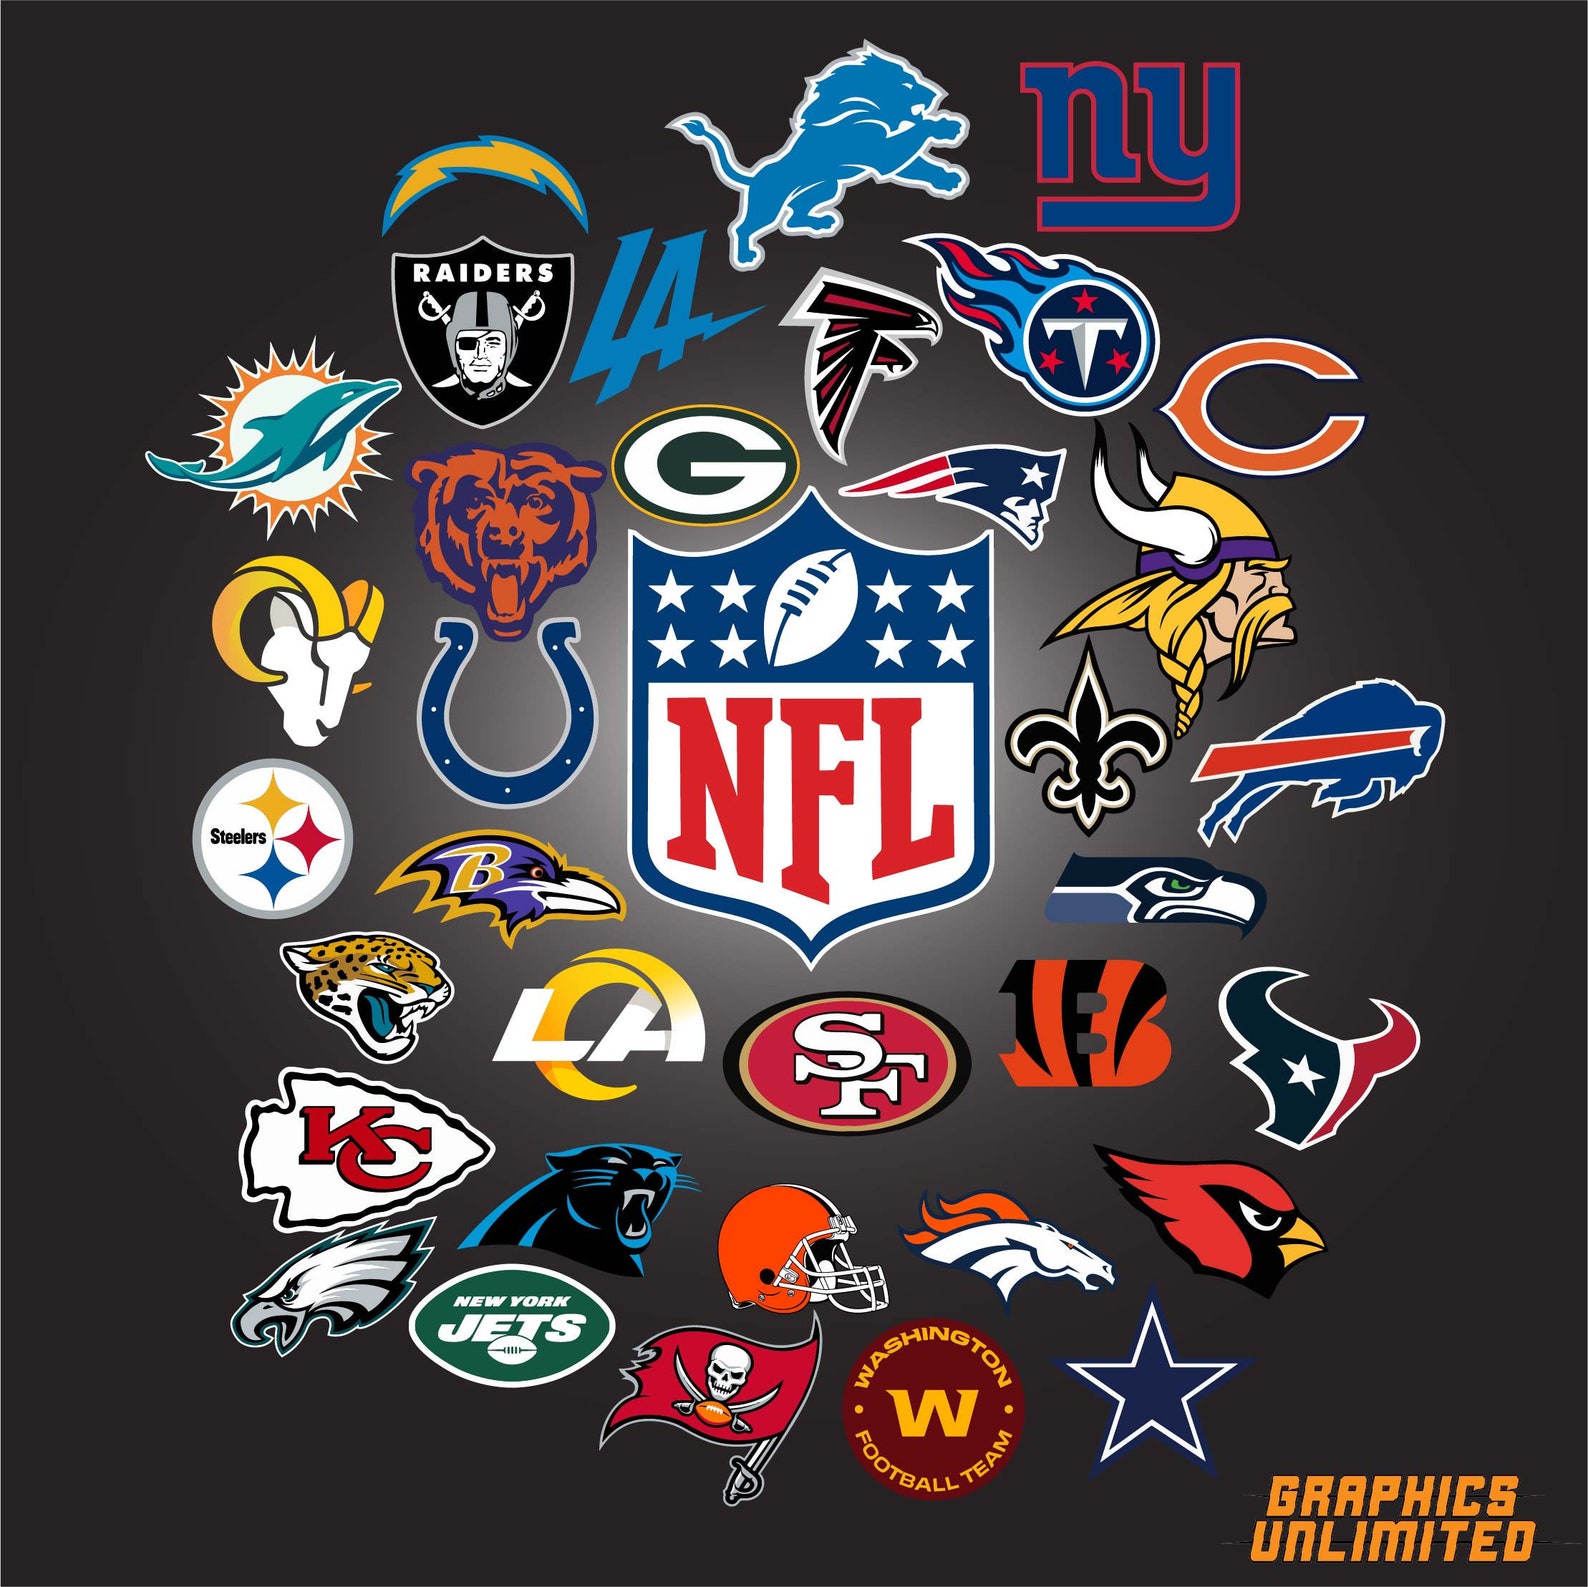 Alle 32 NFL SVG Teams Logos Up To Date Skalierbare aiDatei Etsy